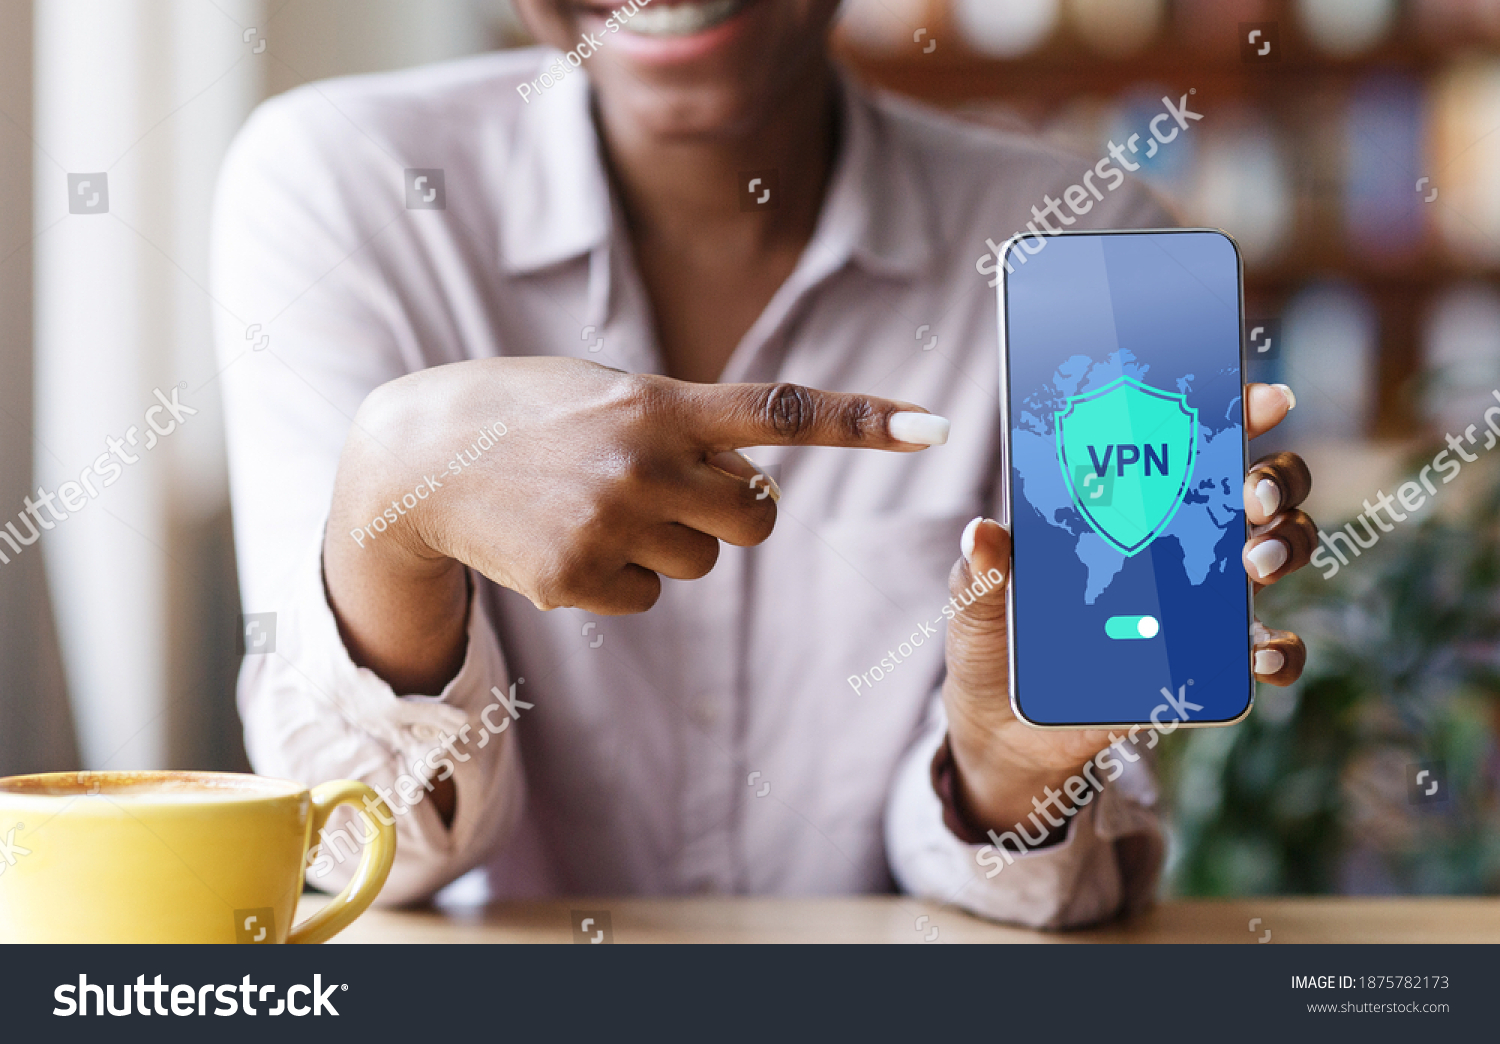 VPN App. Black Woman Pointing At Smartphone With Opened Virtual Private Network Application On Screen, African American Lady Enjoying Modern Technologies For Syber Security, Creative Collage, Closeup #1875782173